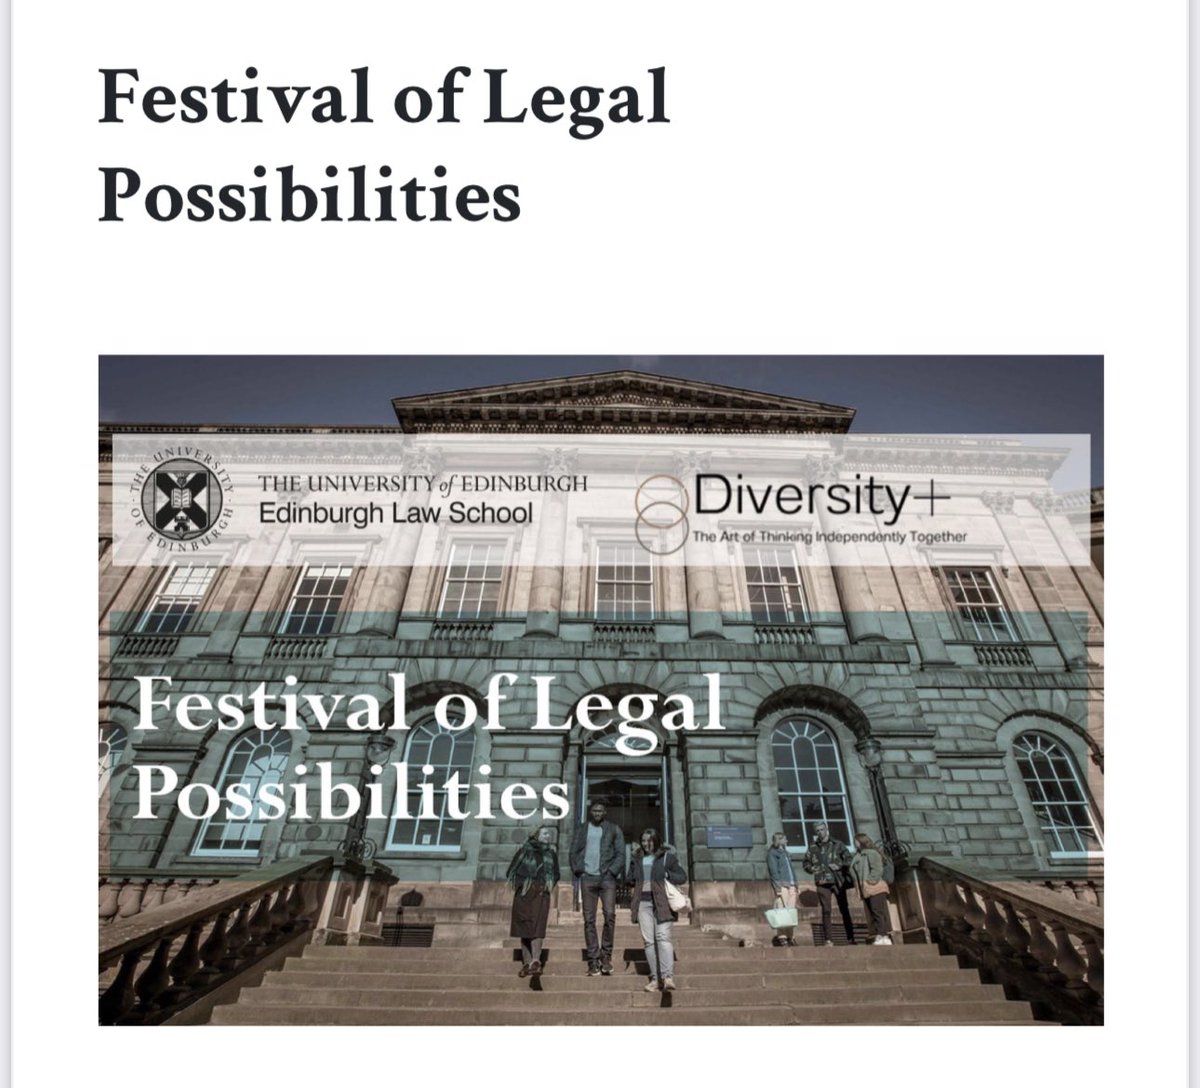 This 👇🏽 come learn and share experiences about diversity and inclusion in the Scottish legal sector. 9 sessions over 3 days with over 39 speakers from all backgrounds and careers #Diversity #intersectionality #inclusion #womeninlaw